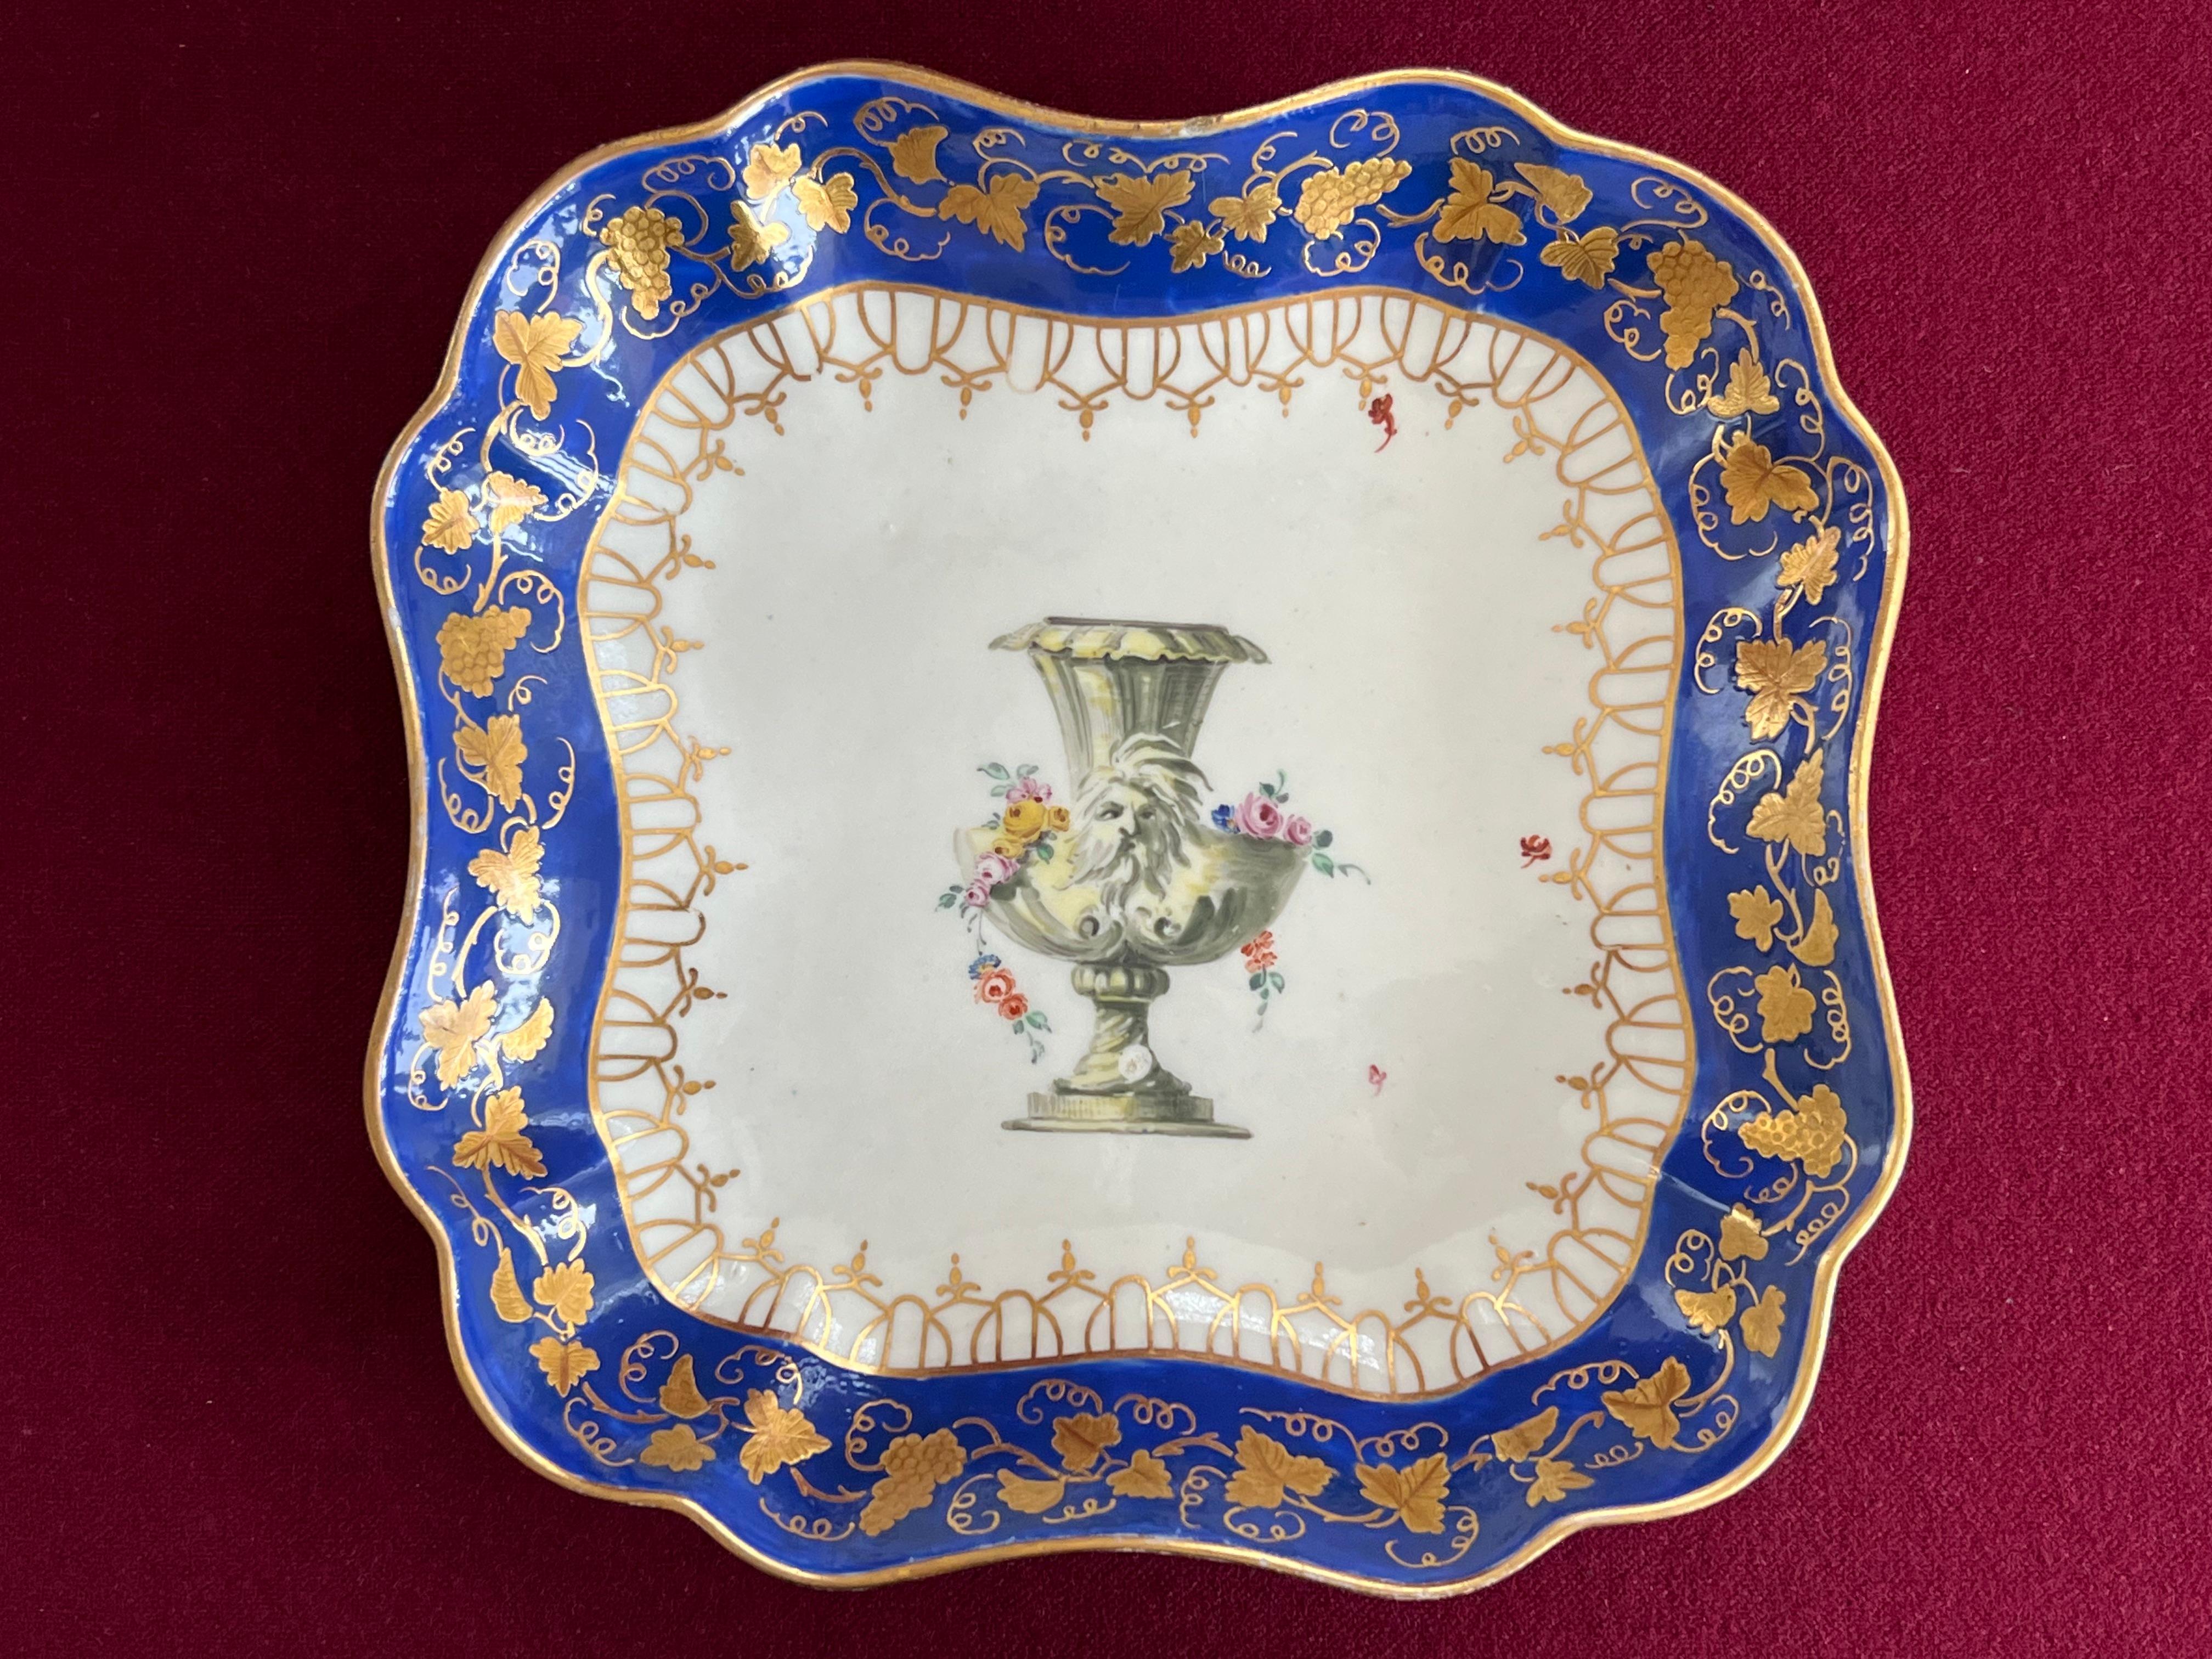 A fine Worcester porcelain square dish circa 1770. Finely decorated in the London atelier of James Giles. Decorated with an overglaze royal blue border and tooled gilding. The central cavetto decorated in typical Giles style with a classical urn